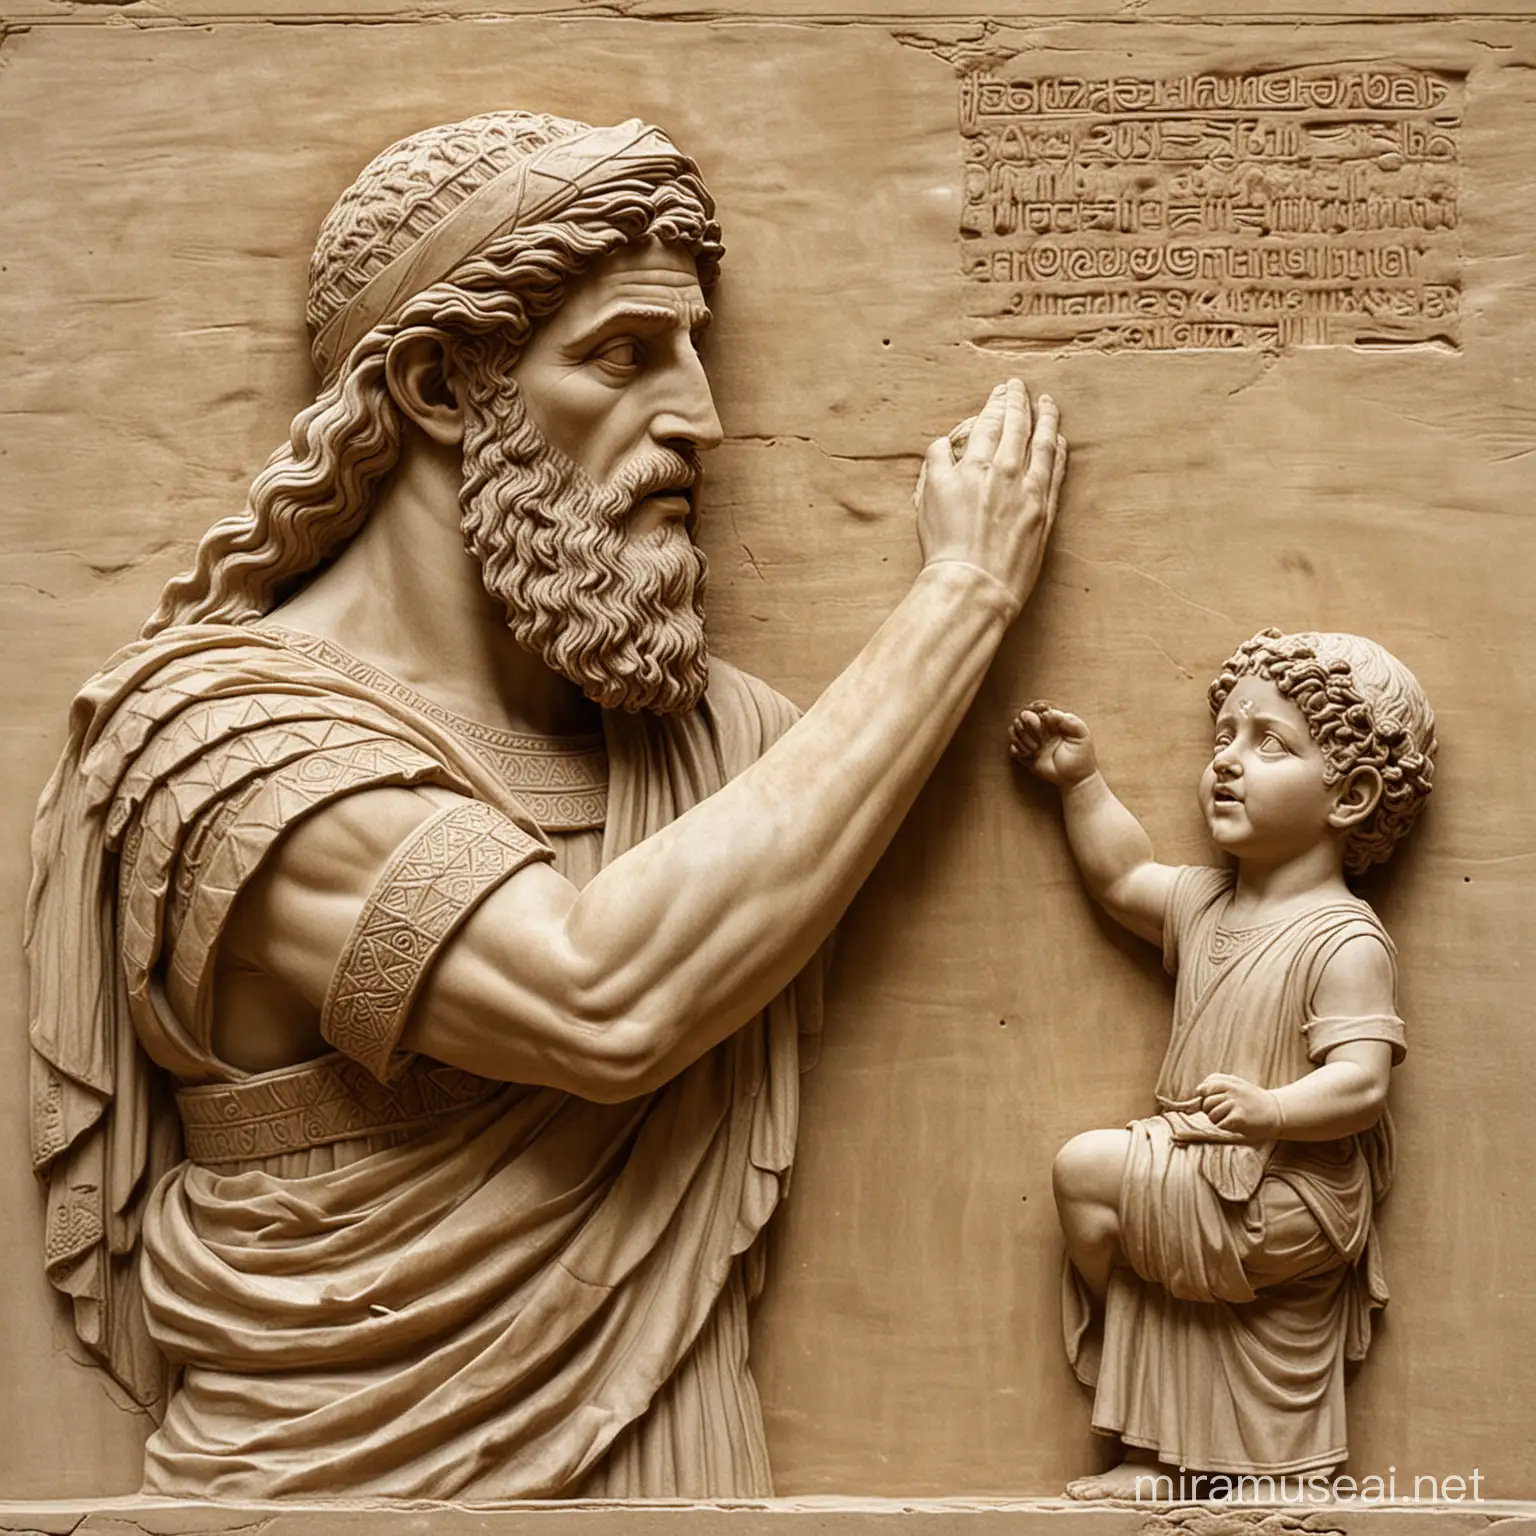 Babylonian A powerful Roman men hand holding a small, terrified child's hand.